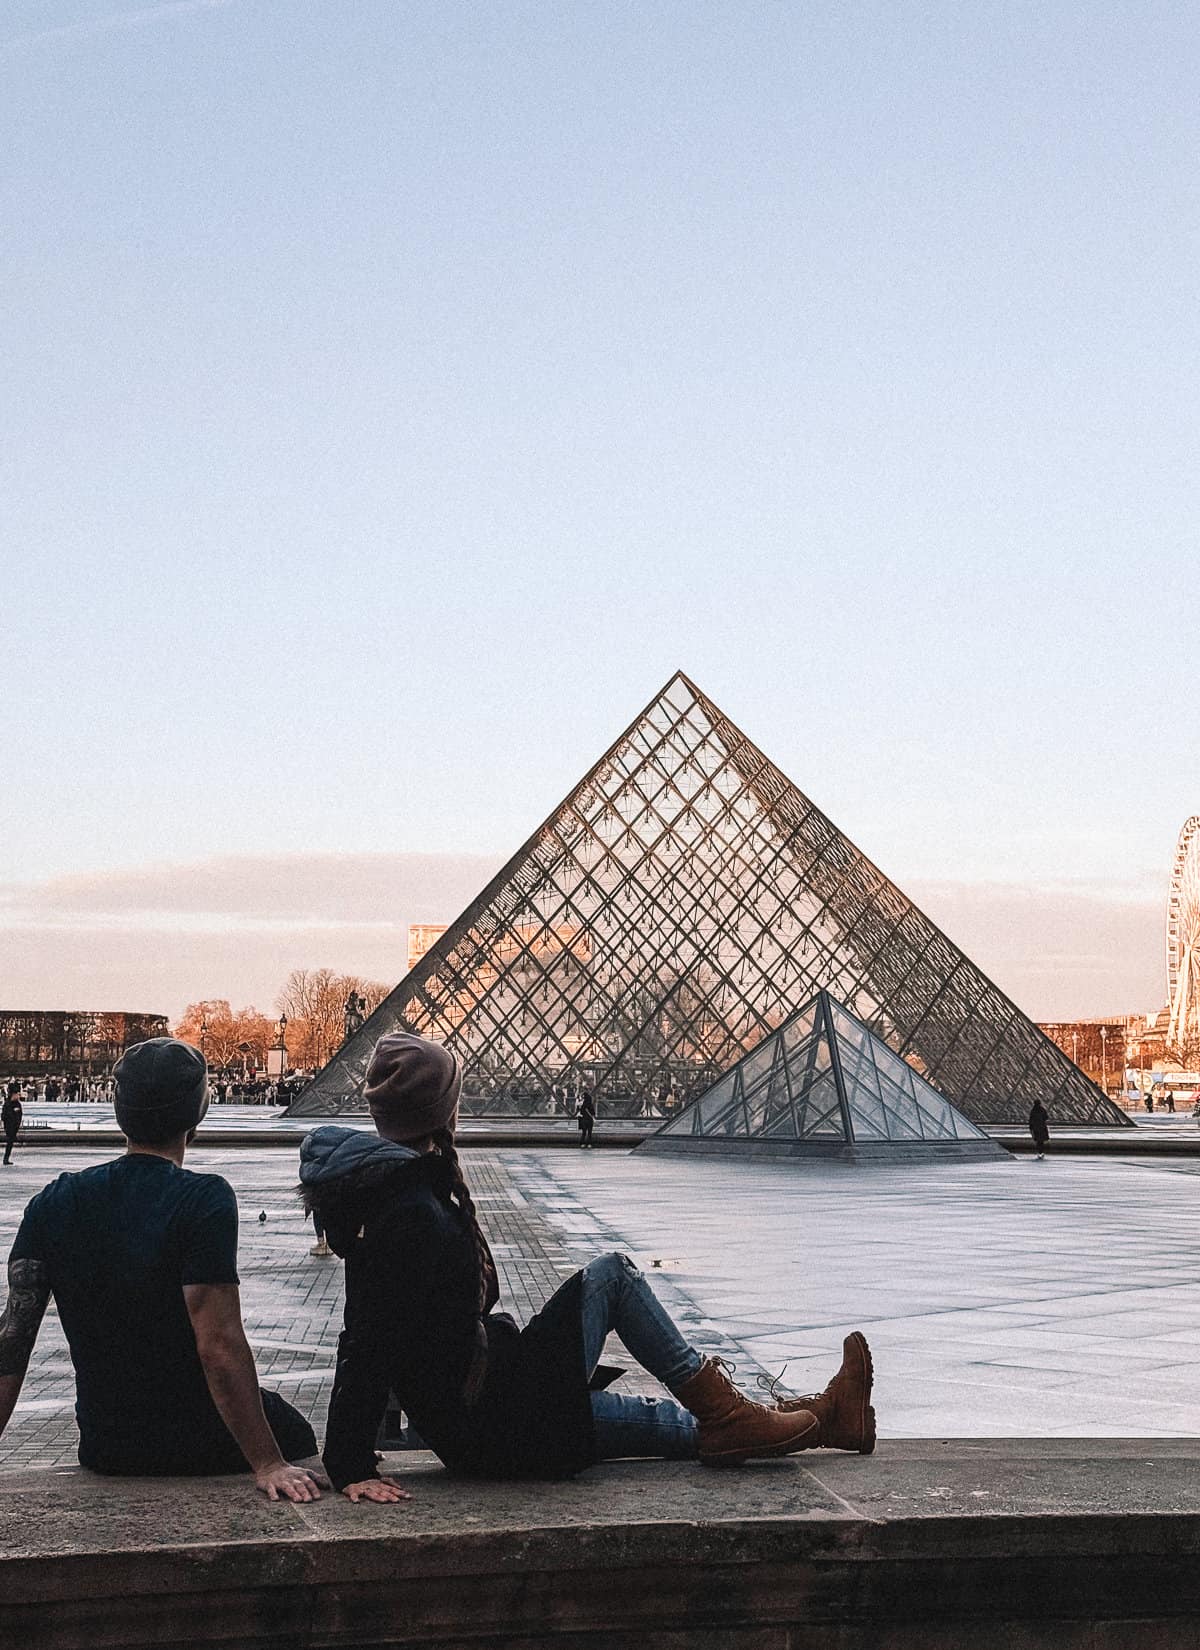 A couple sits back-to-back on the edge of the fountain at the Louvre, with the museum's famed glass pyramid and a clear blue sky at dusk.